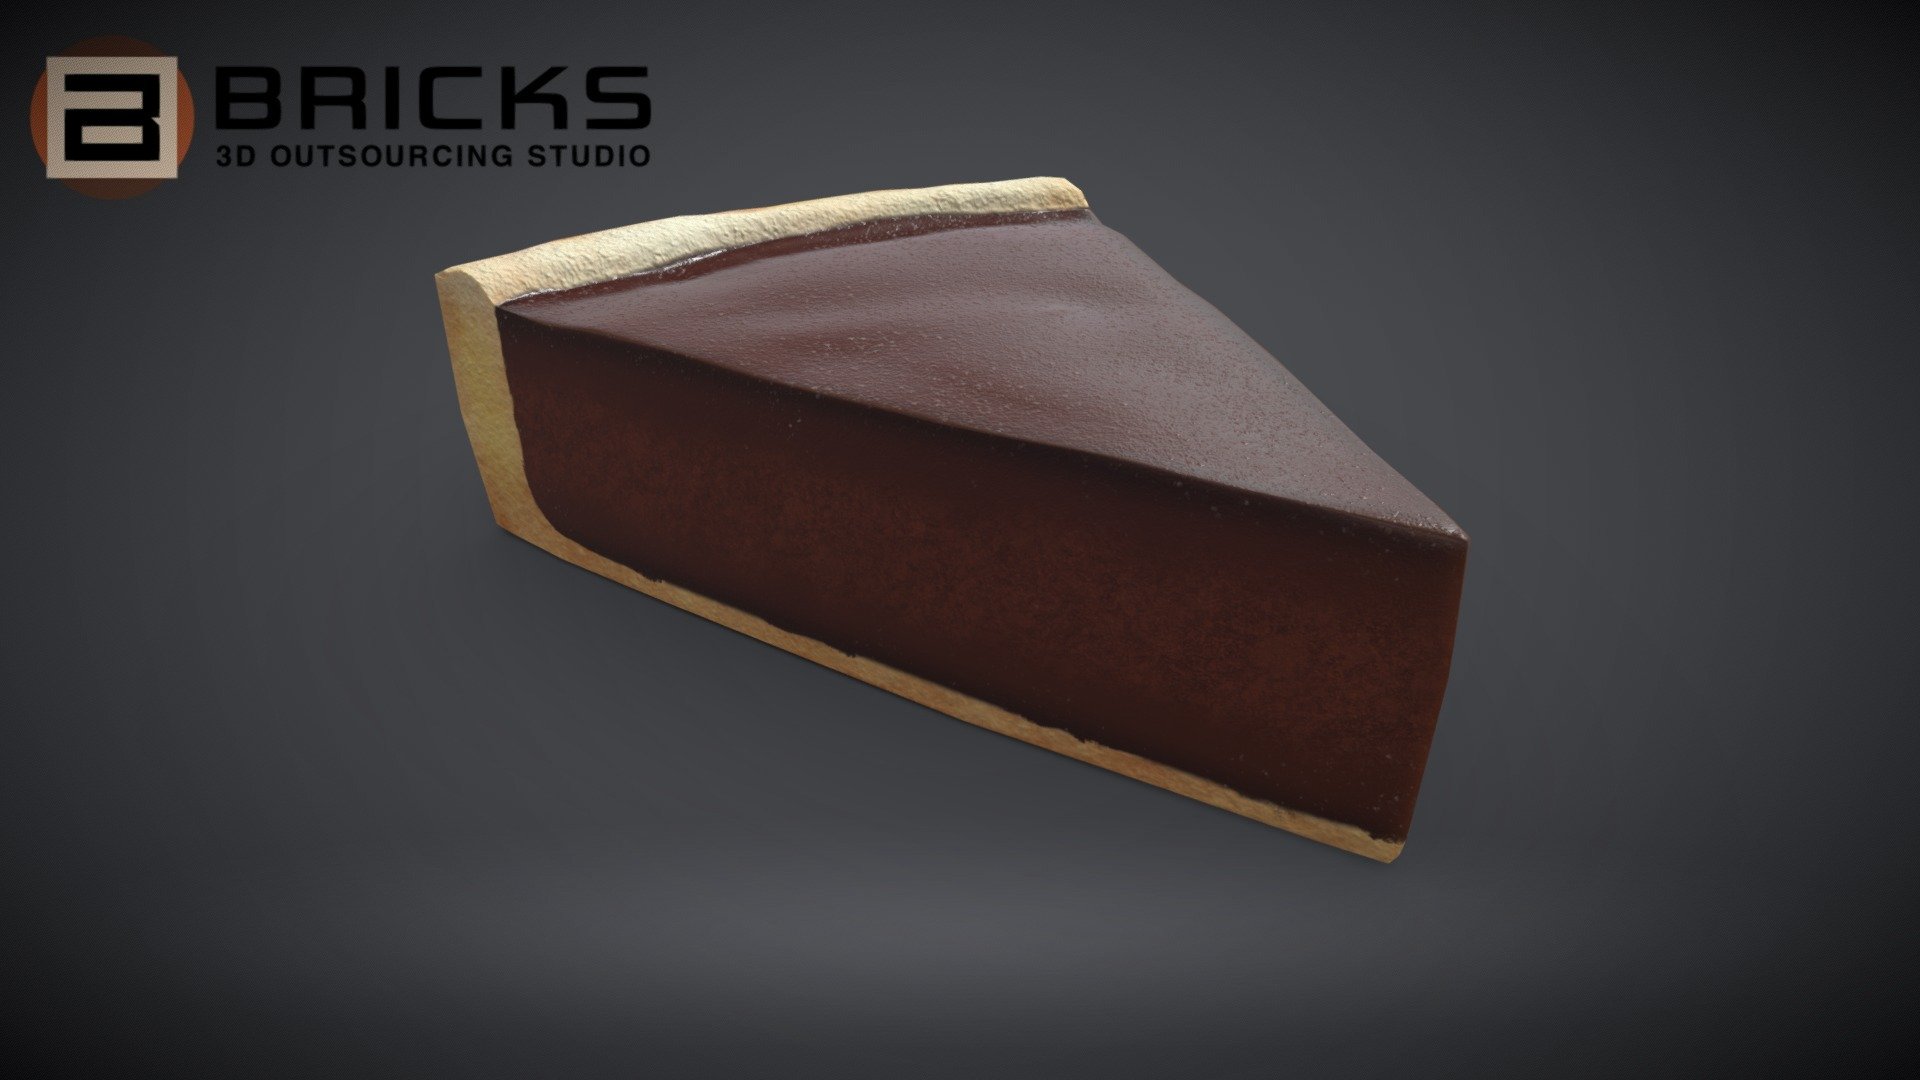 PBR Food Asset:
ChocolatePie_Piece
Polycount: 648
Vertex count: 326
Texture Size: 2048px x 2048px
Normal: OpenGL

If you need any adjust in file please contact us: team@bricks3dstudio.com

Hire us: tringuyen@bricks3dstudio.com
Here is us: https://www.bricks3dstudio.com/
        https://www.artstation.com/bricksstudio
        https://www.facebook.com/Bricks3dstudio/
        https://www.linkedin.com/in/bricks-studio-b10462252/ - ChocolatePiePiece - Buy Royalty Free 3D model by Bricks Studio (@bricks3dstudio) 3d model